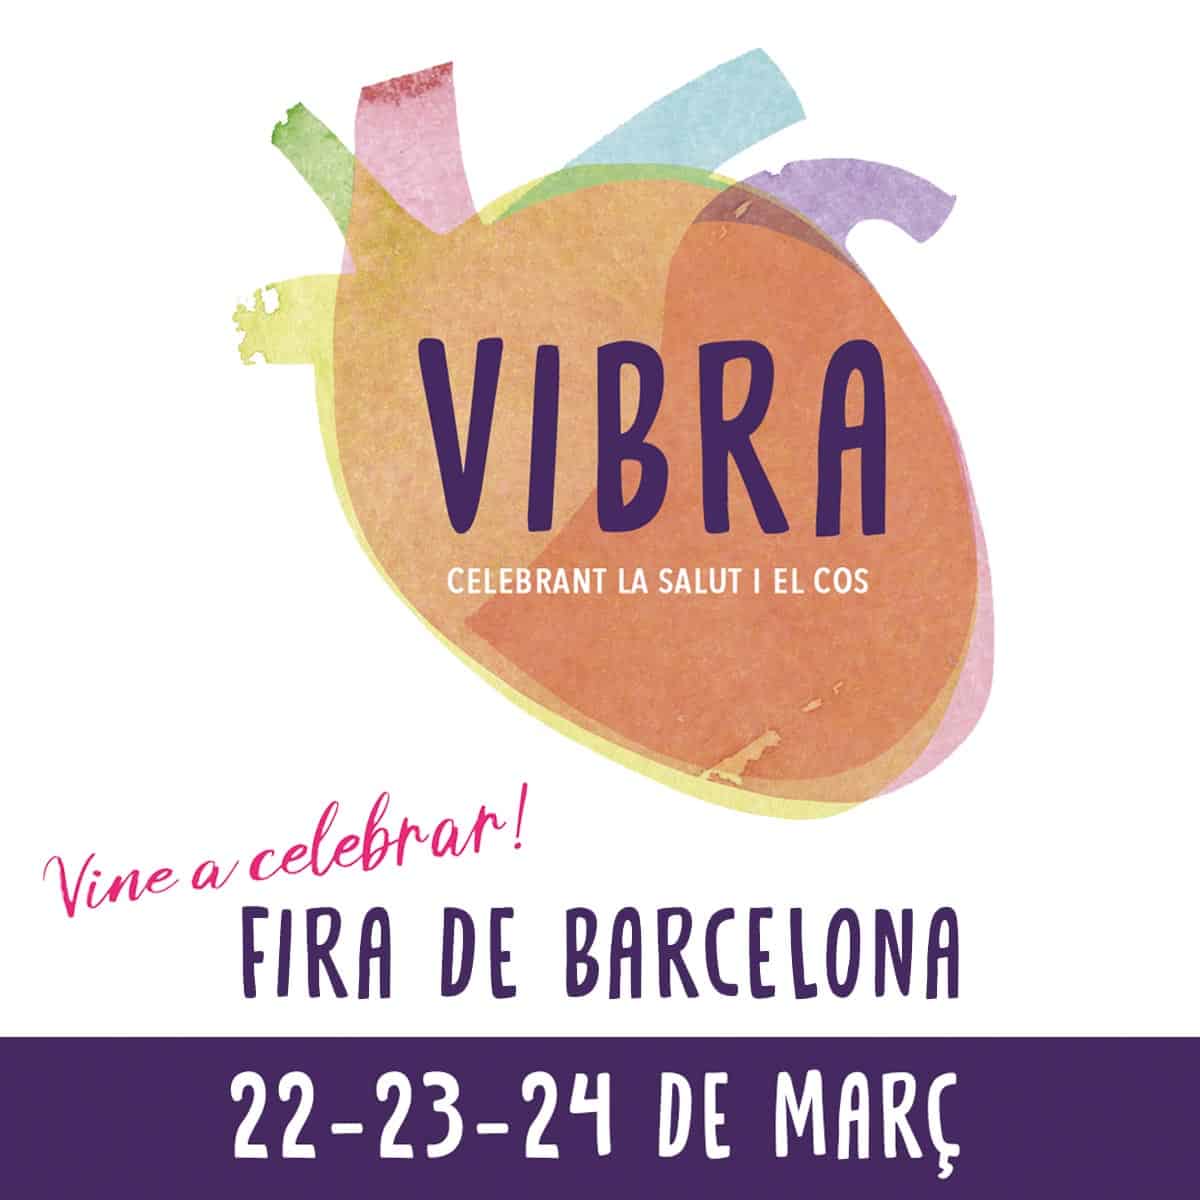 Festival Vibra: the health and food event coming to Barcelona